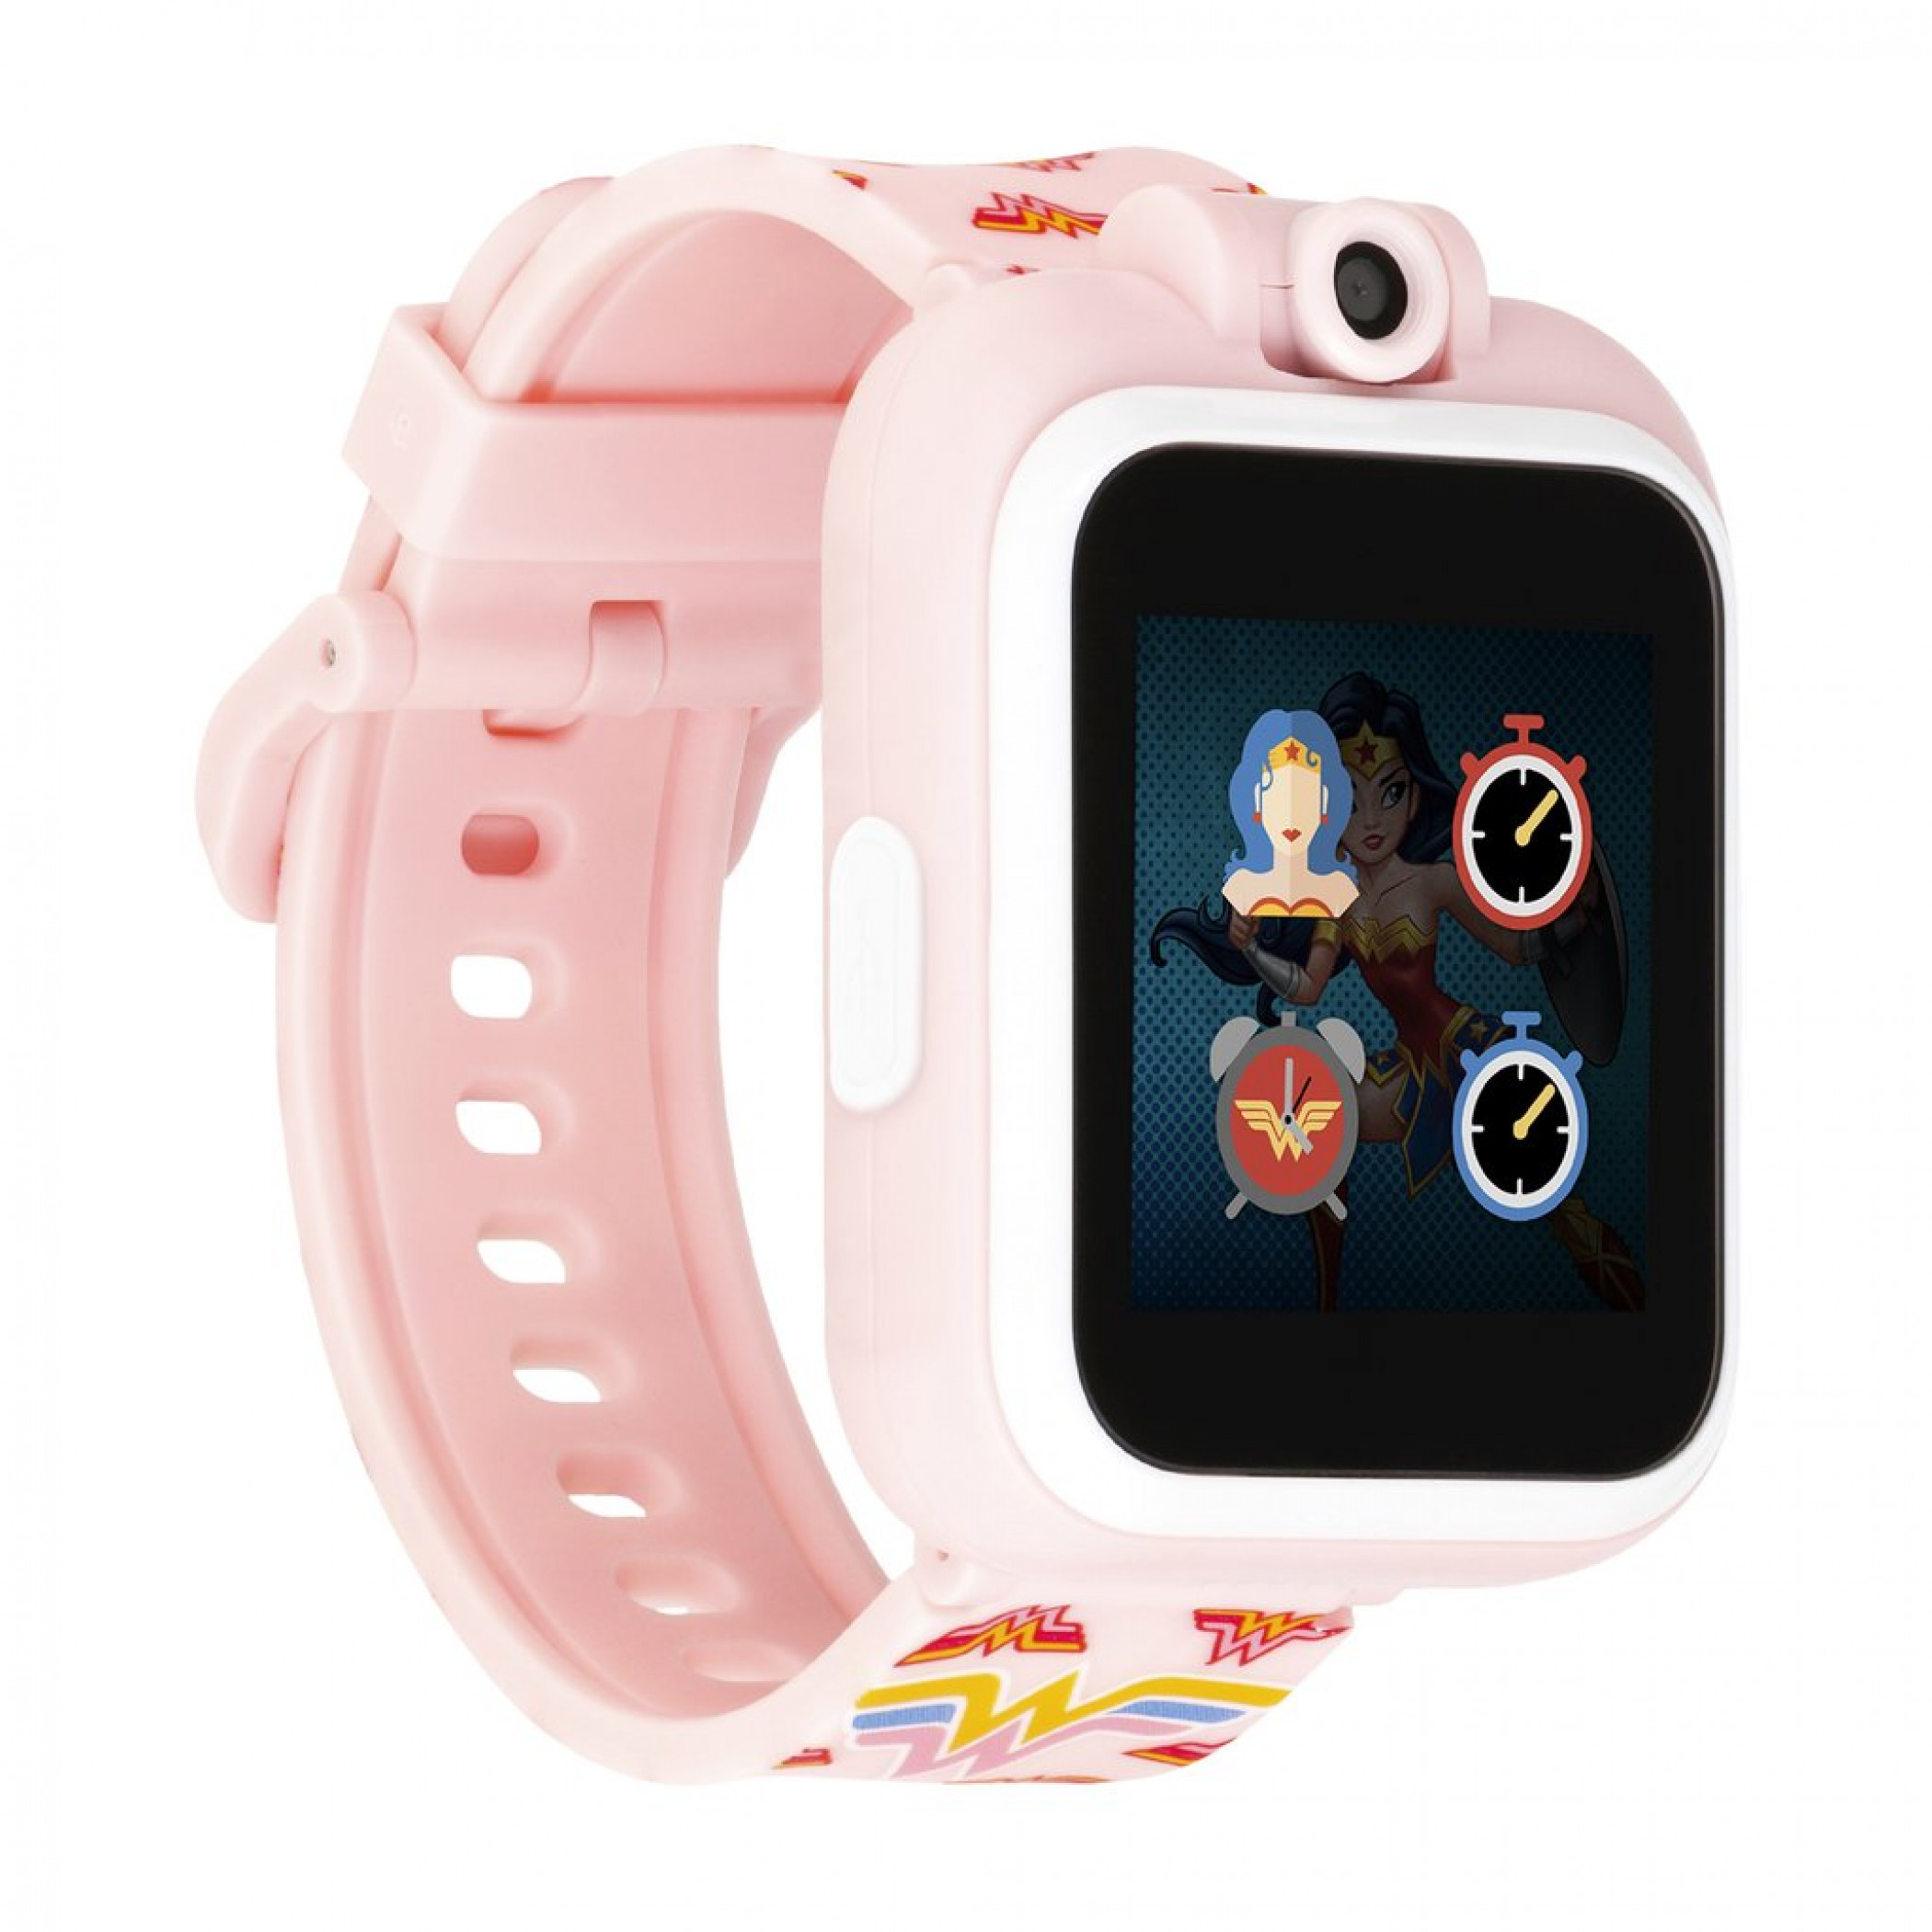 Wonder Woman Classics Symbol All Over Kids Smart Watch by Playzoom